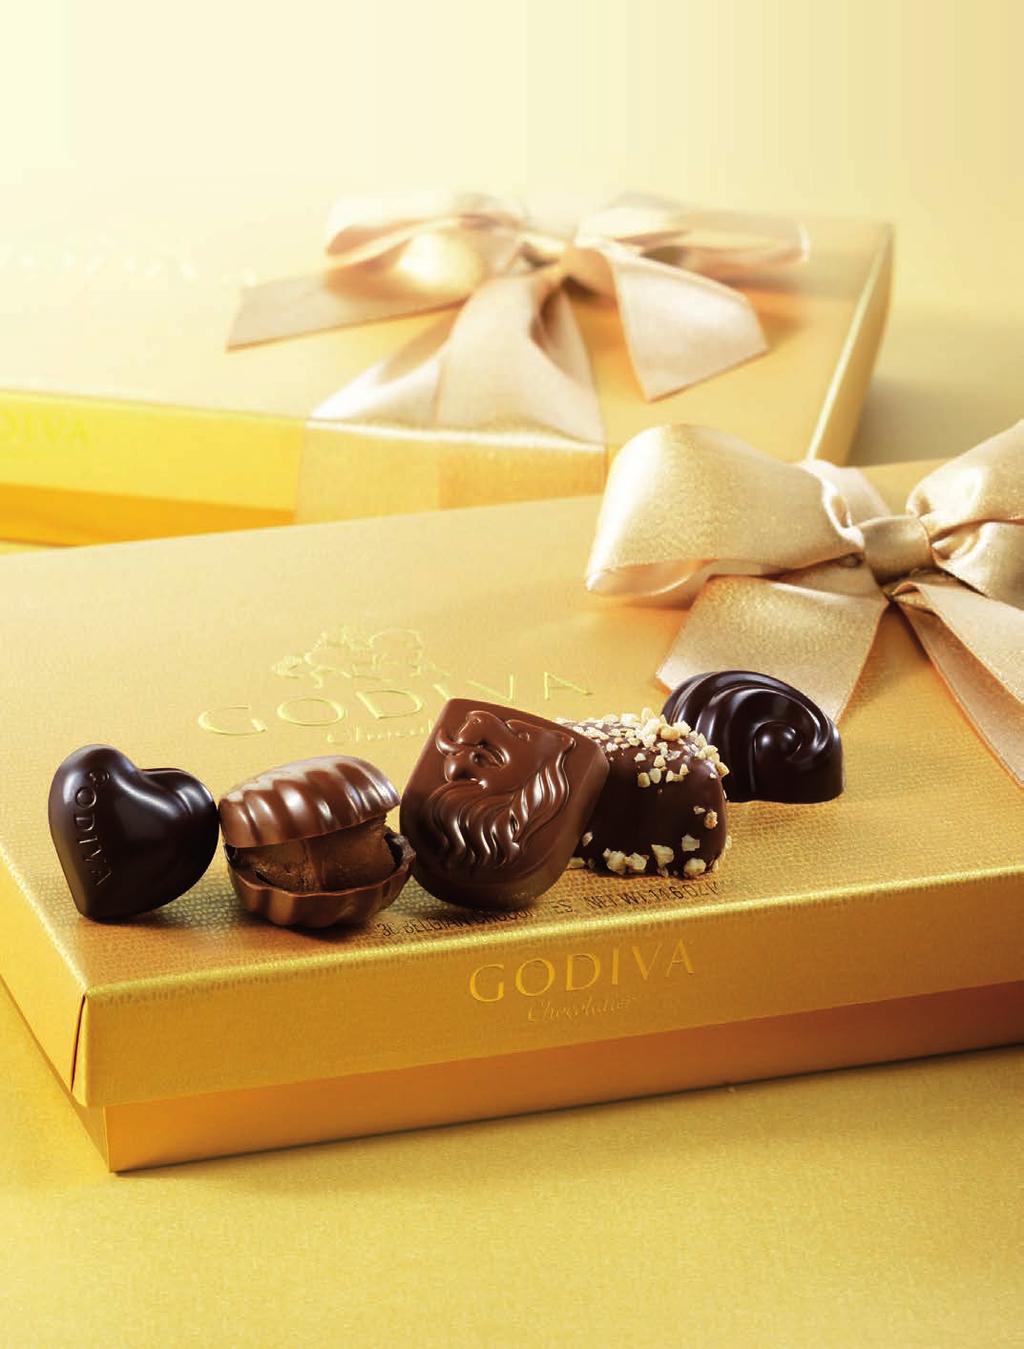 INTROUING THE NEW Godiva Gold iscovery